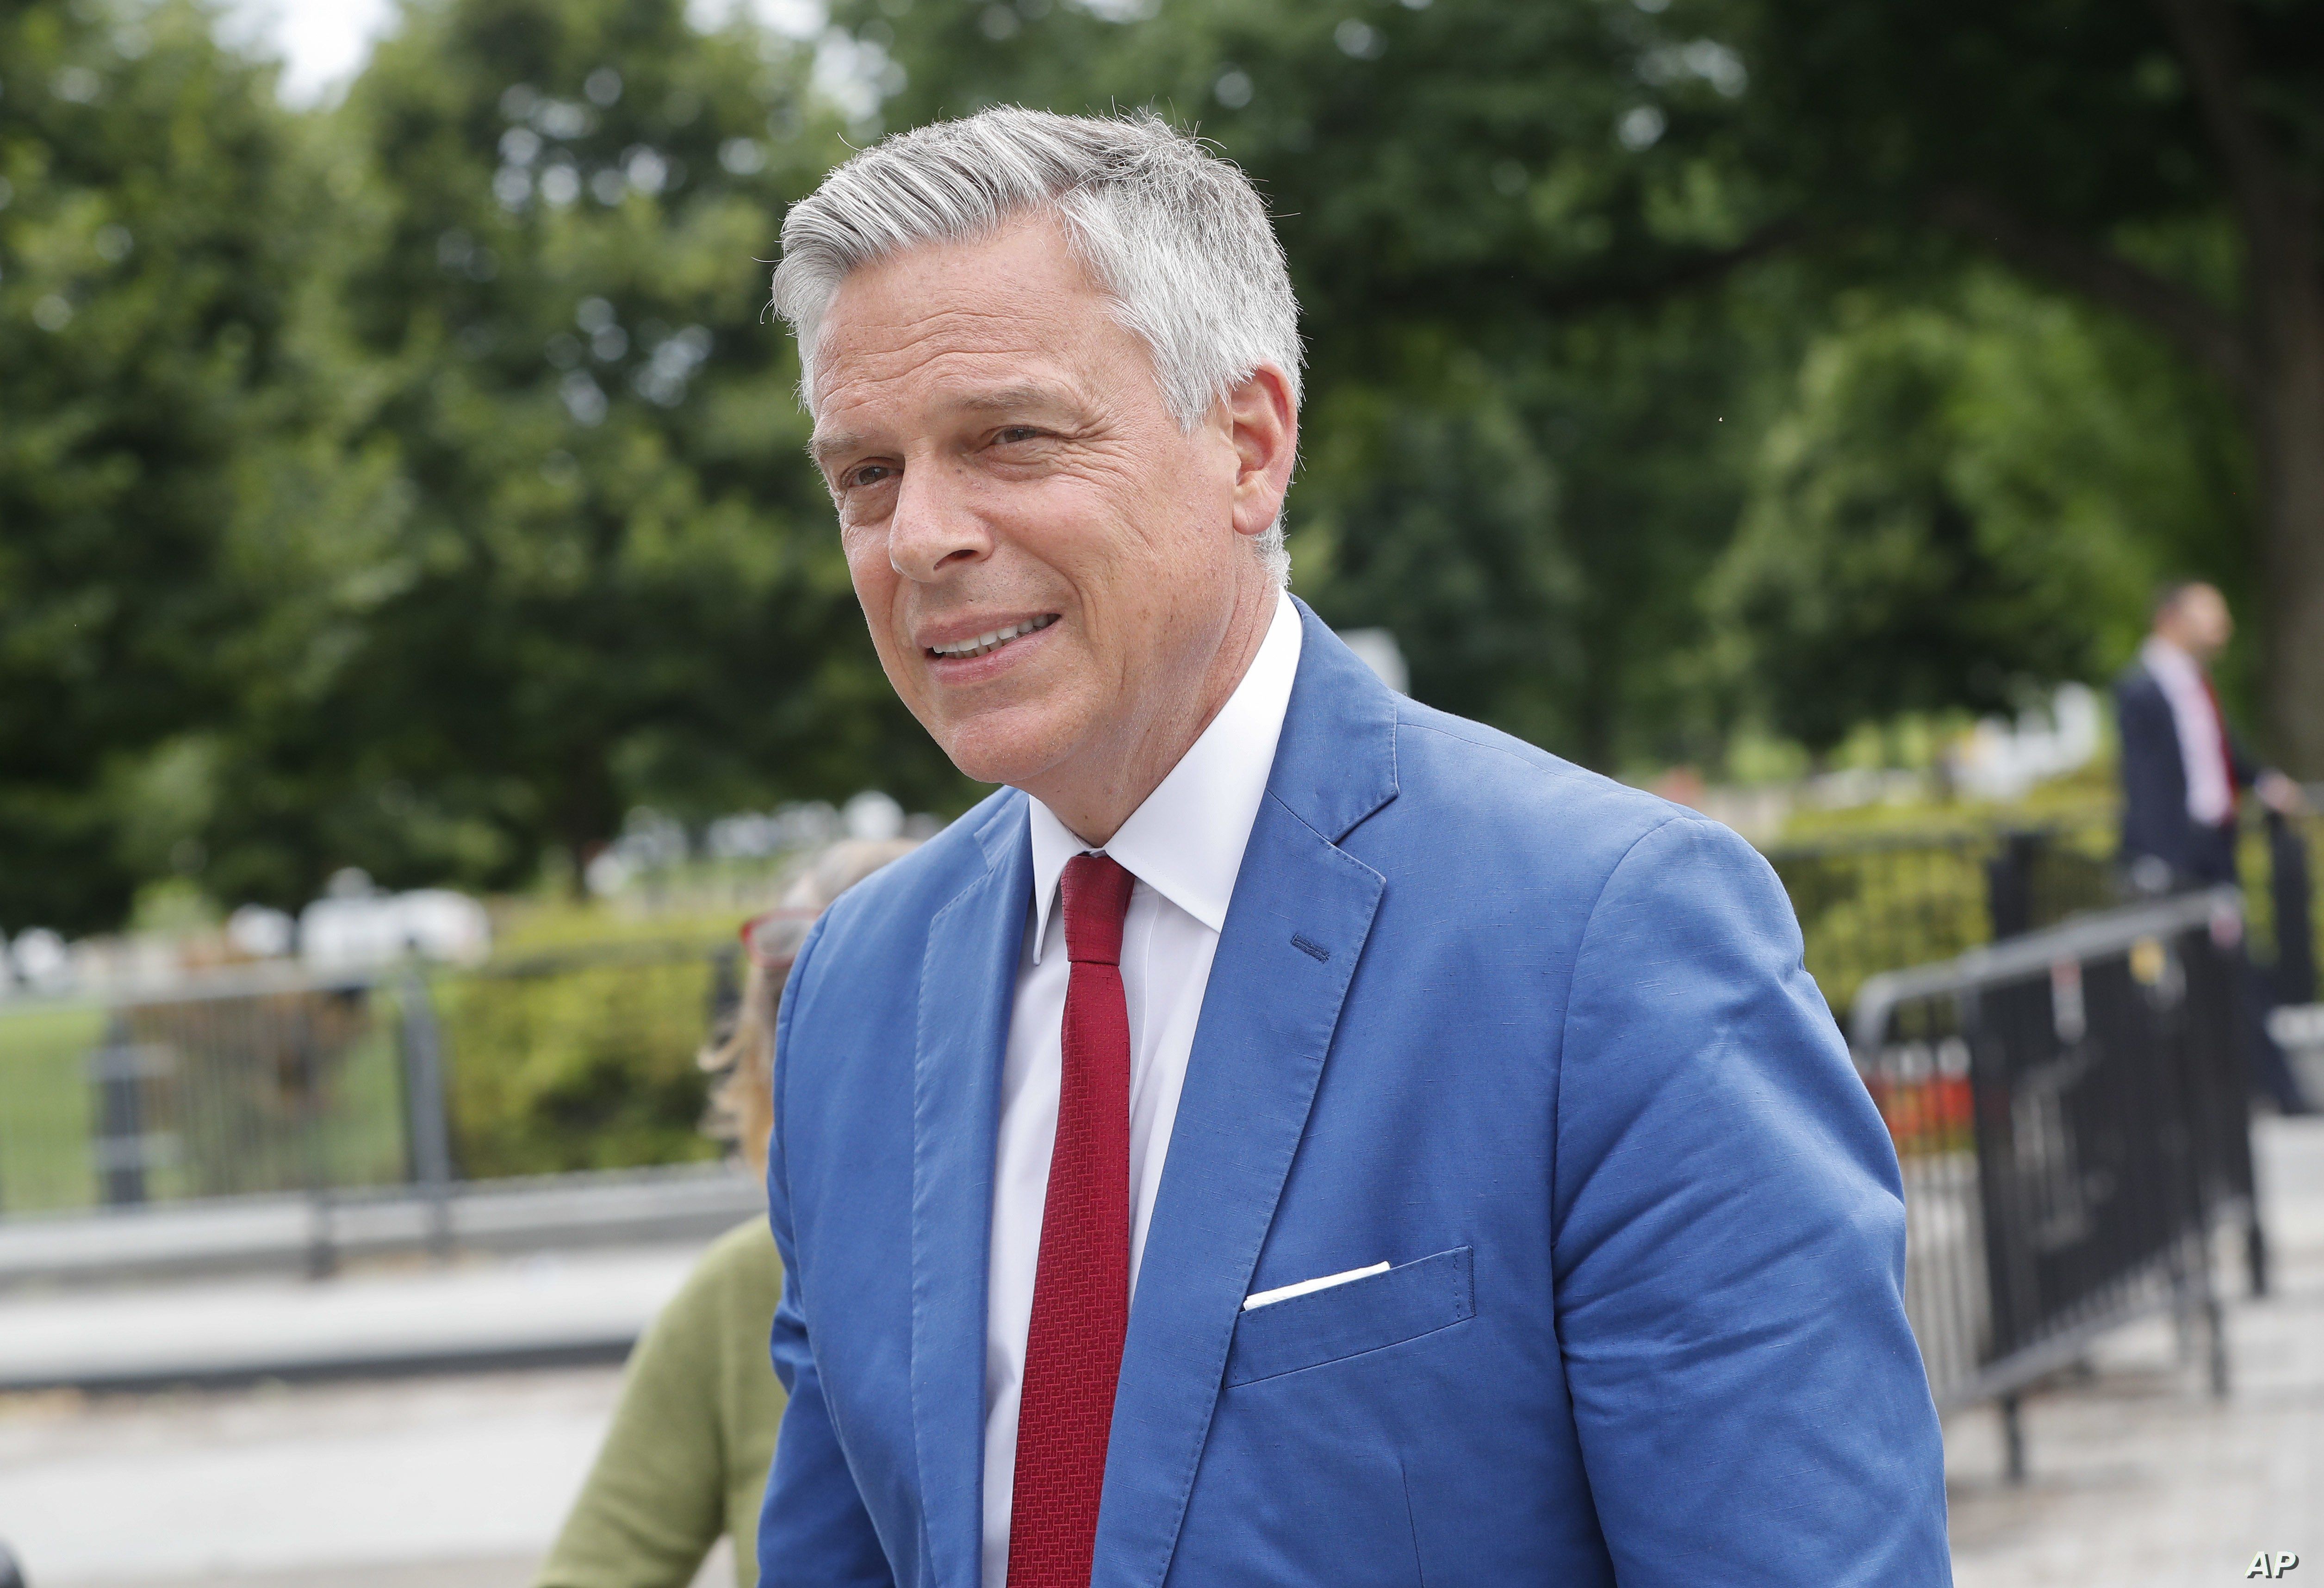 FILE - Jon Huntsman, U.S. ambassador to Russia, arrives at the security check point entrance of the White House in Washington, May 30, 2018.